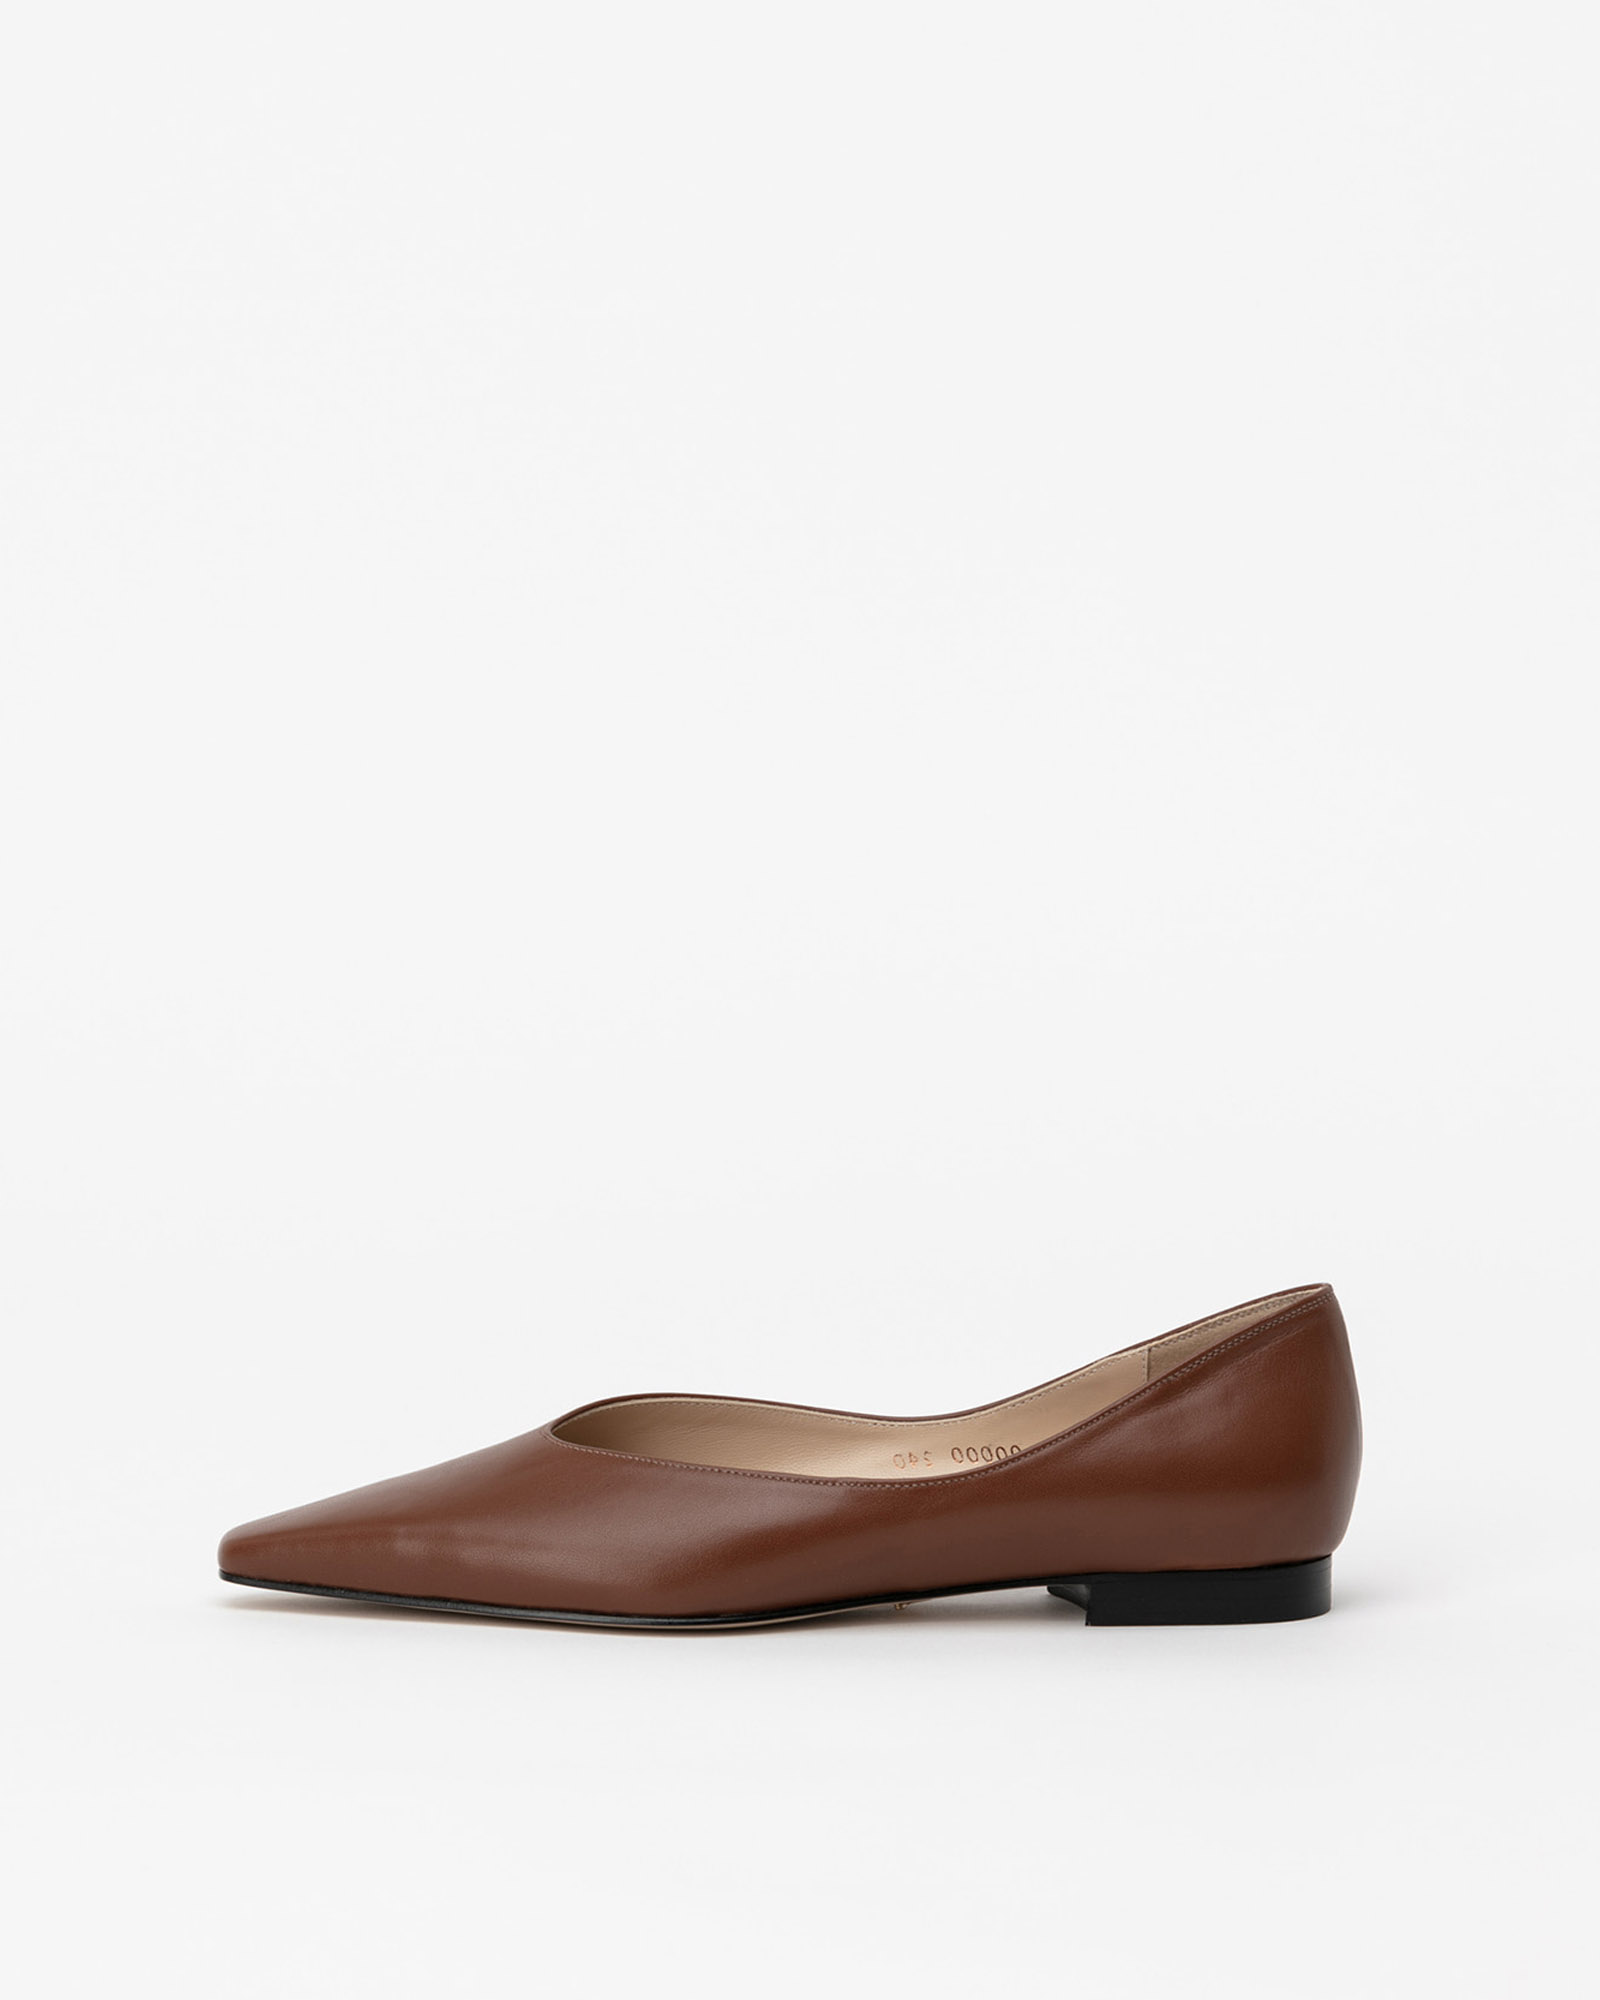 Yvonia Flat Shoes in Regular Brown